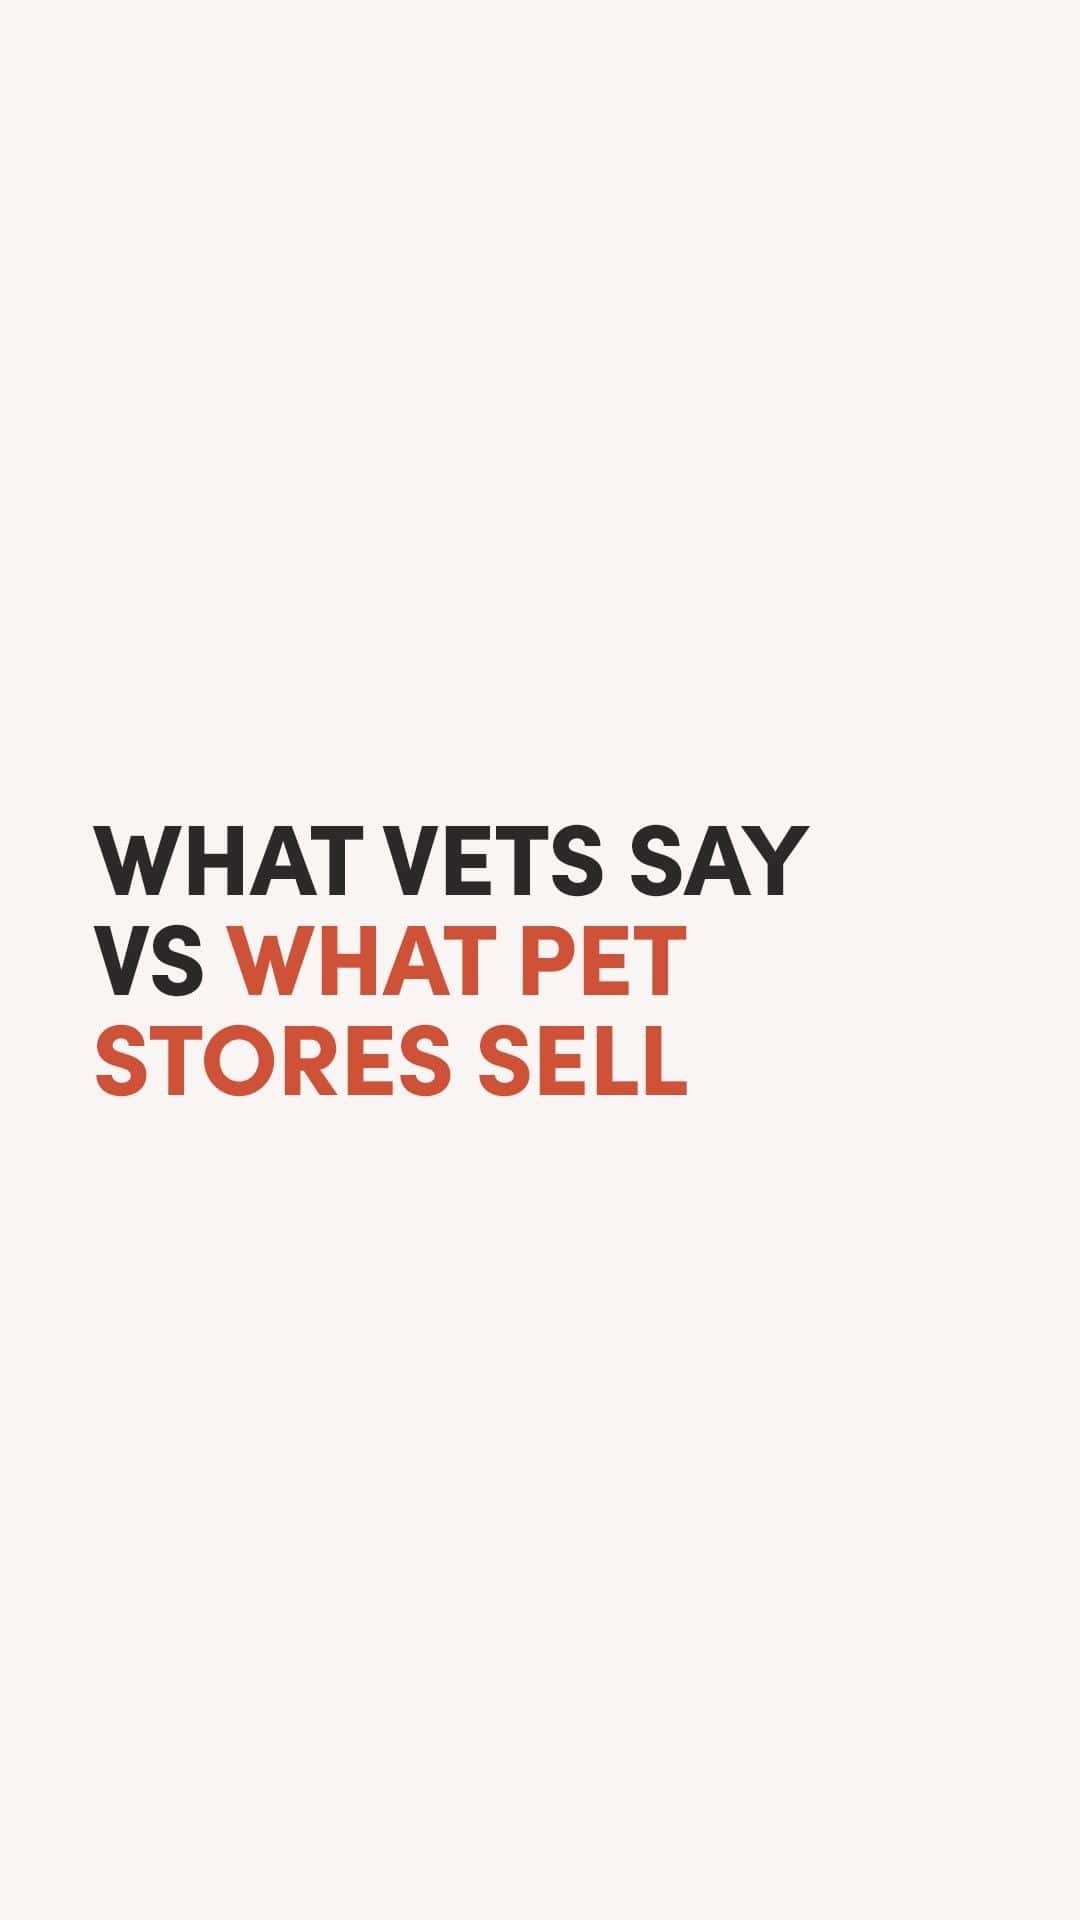 Geordi La Corgiのインスタグラム：「Does anyone else get frustrated by this too? Why do pet stores advertise and sell everything vets say are dangerous for our dogs? There’s so much conflicting information about pet care! 😵‍💫😵」